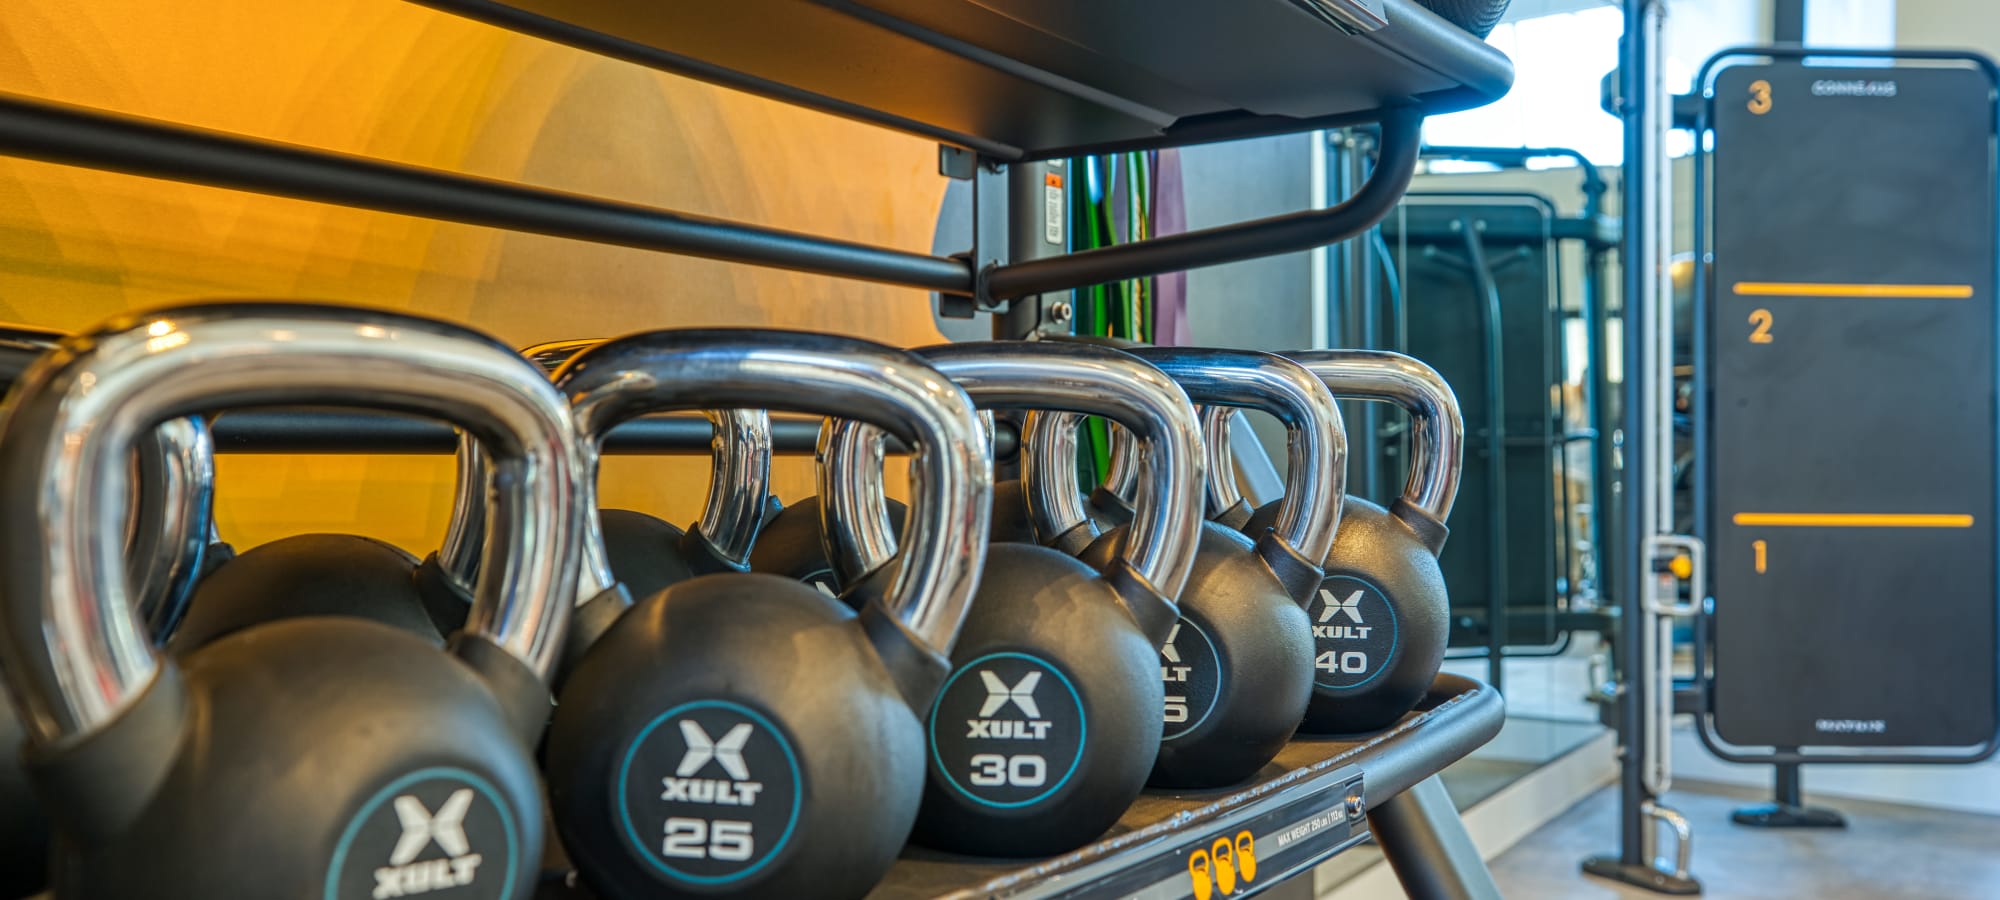 Kettlebell station in fitness center at Alexan Tempe in Tempe, Arizona